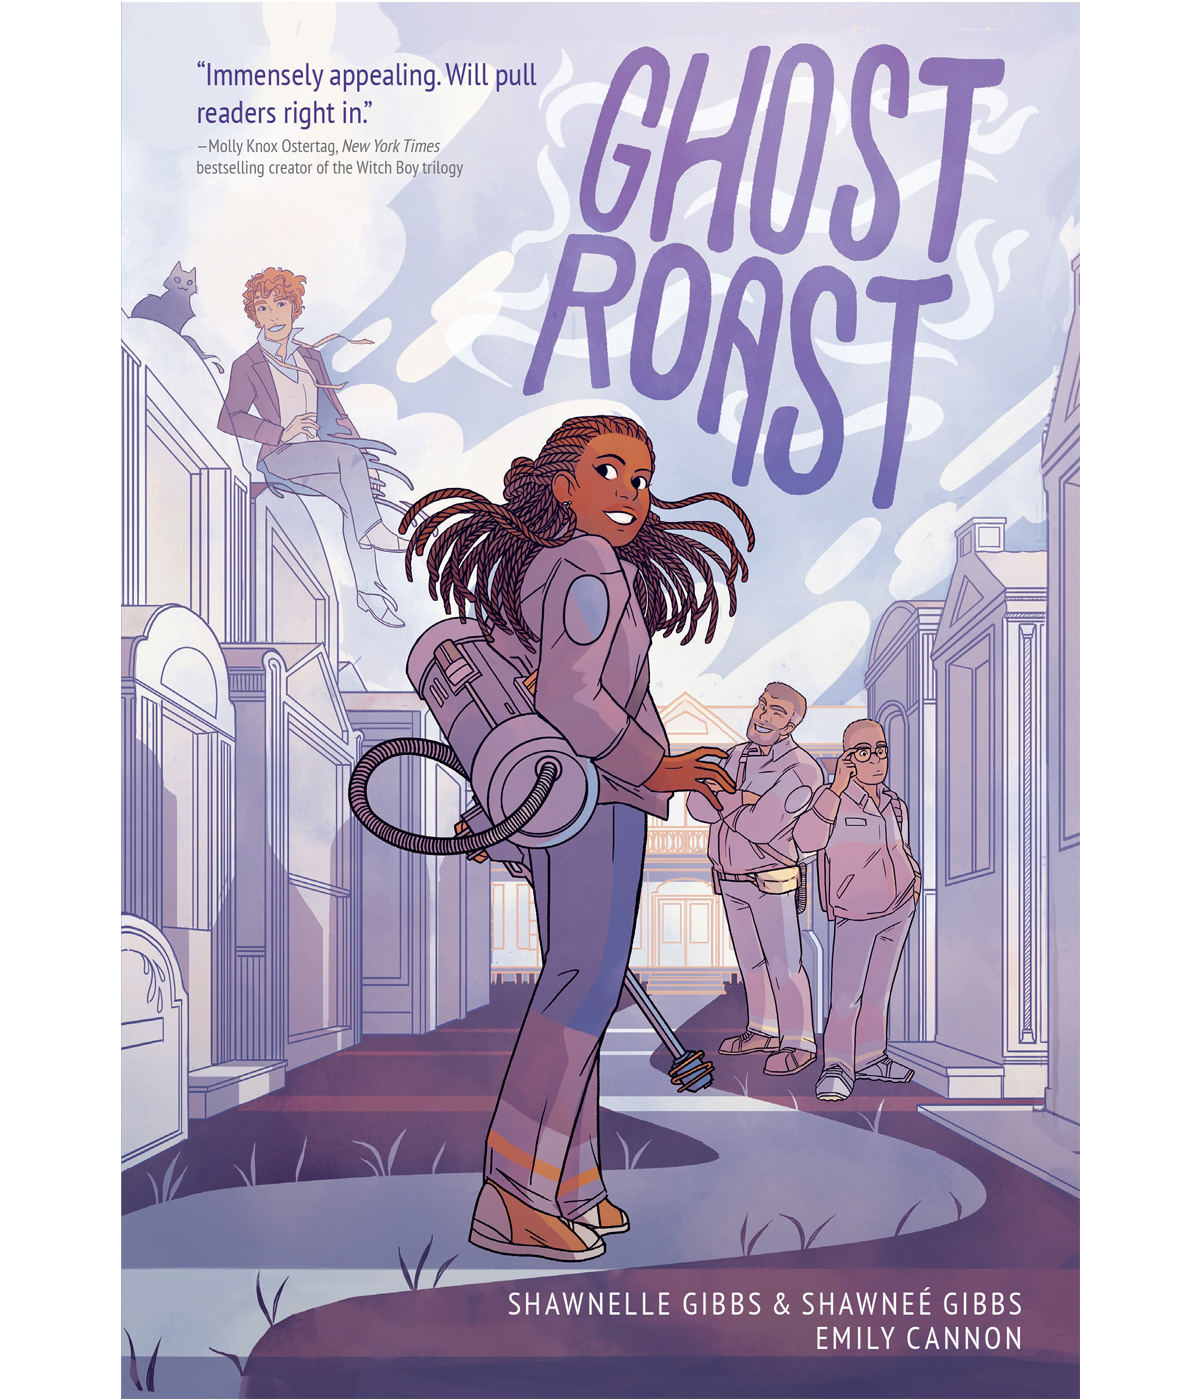 cover art of the comic Ghost Roast which shows a young lady wearing a vacuum aparatus